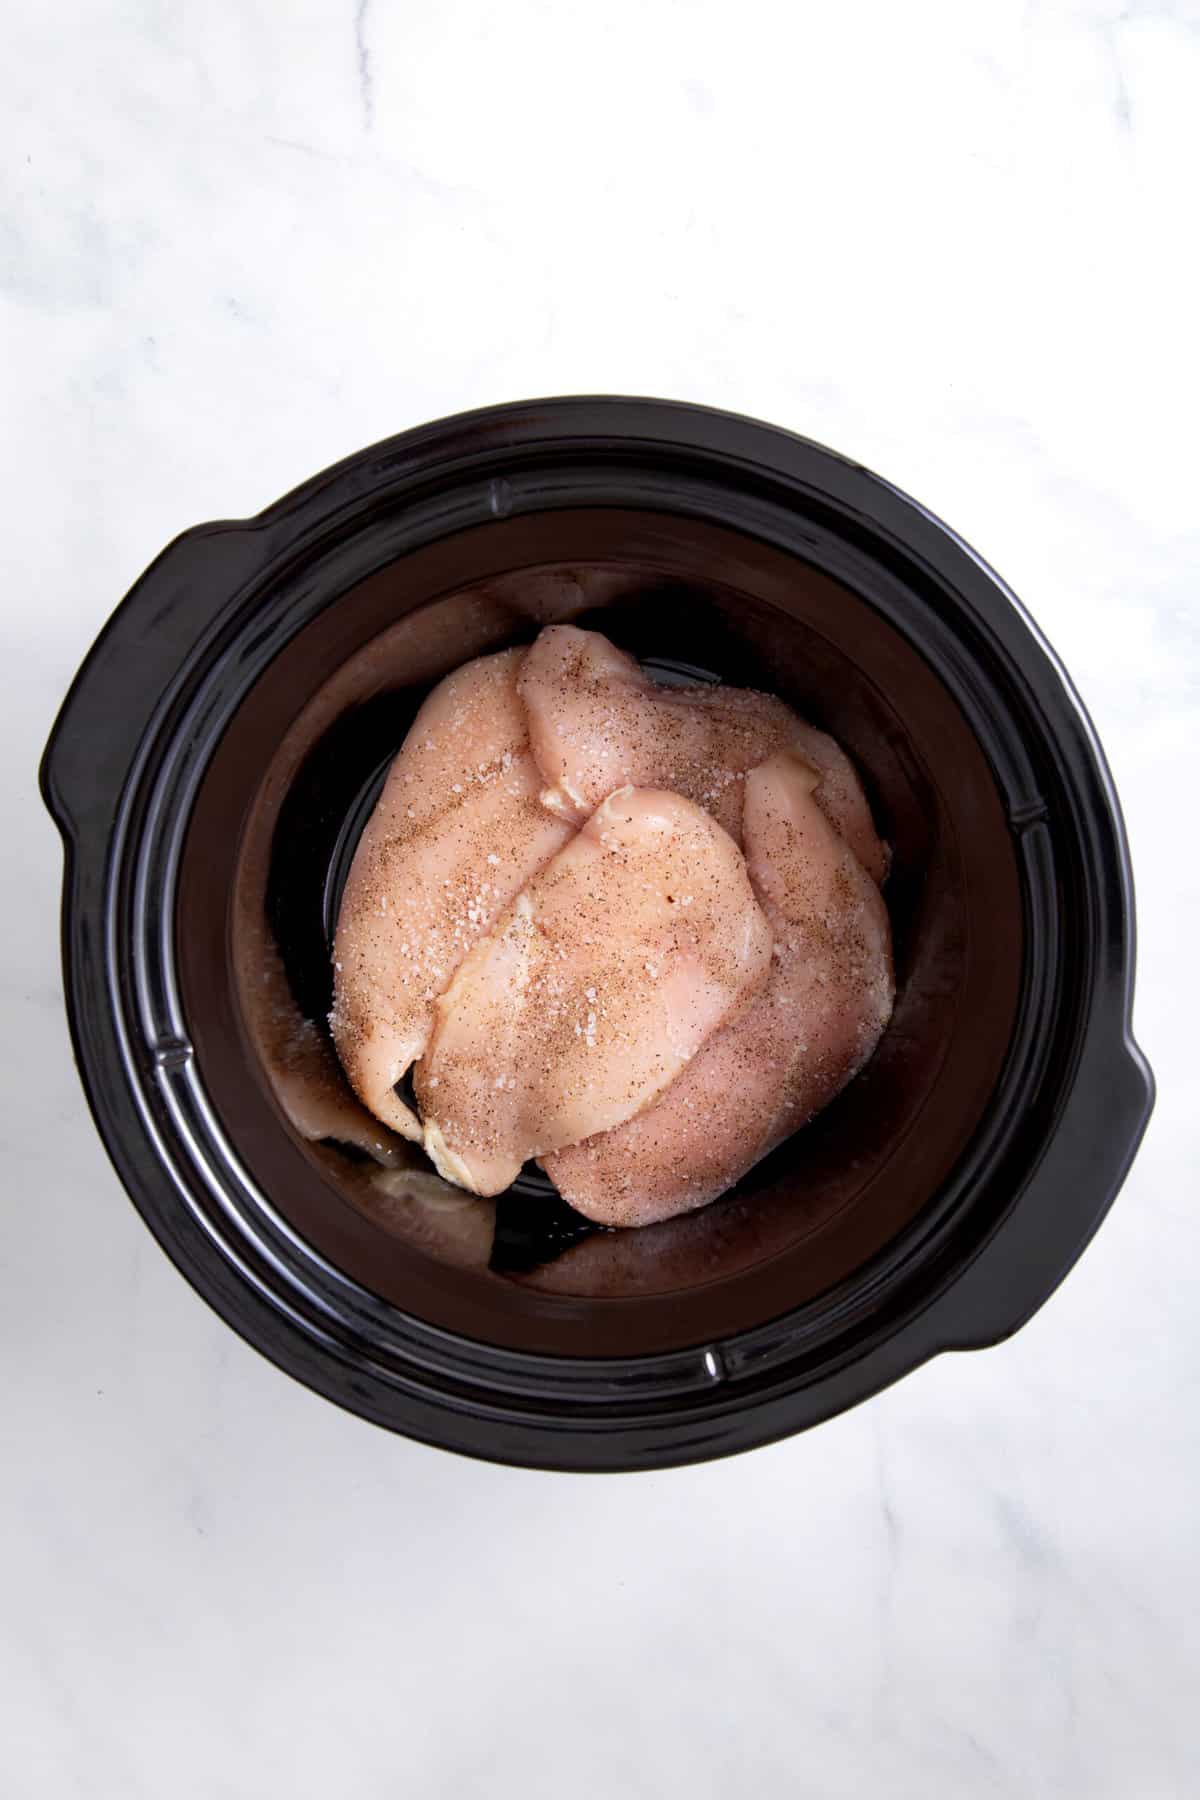 uncooked chicken breasts sitting at the bottom of a crockpot